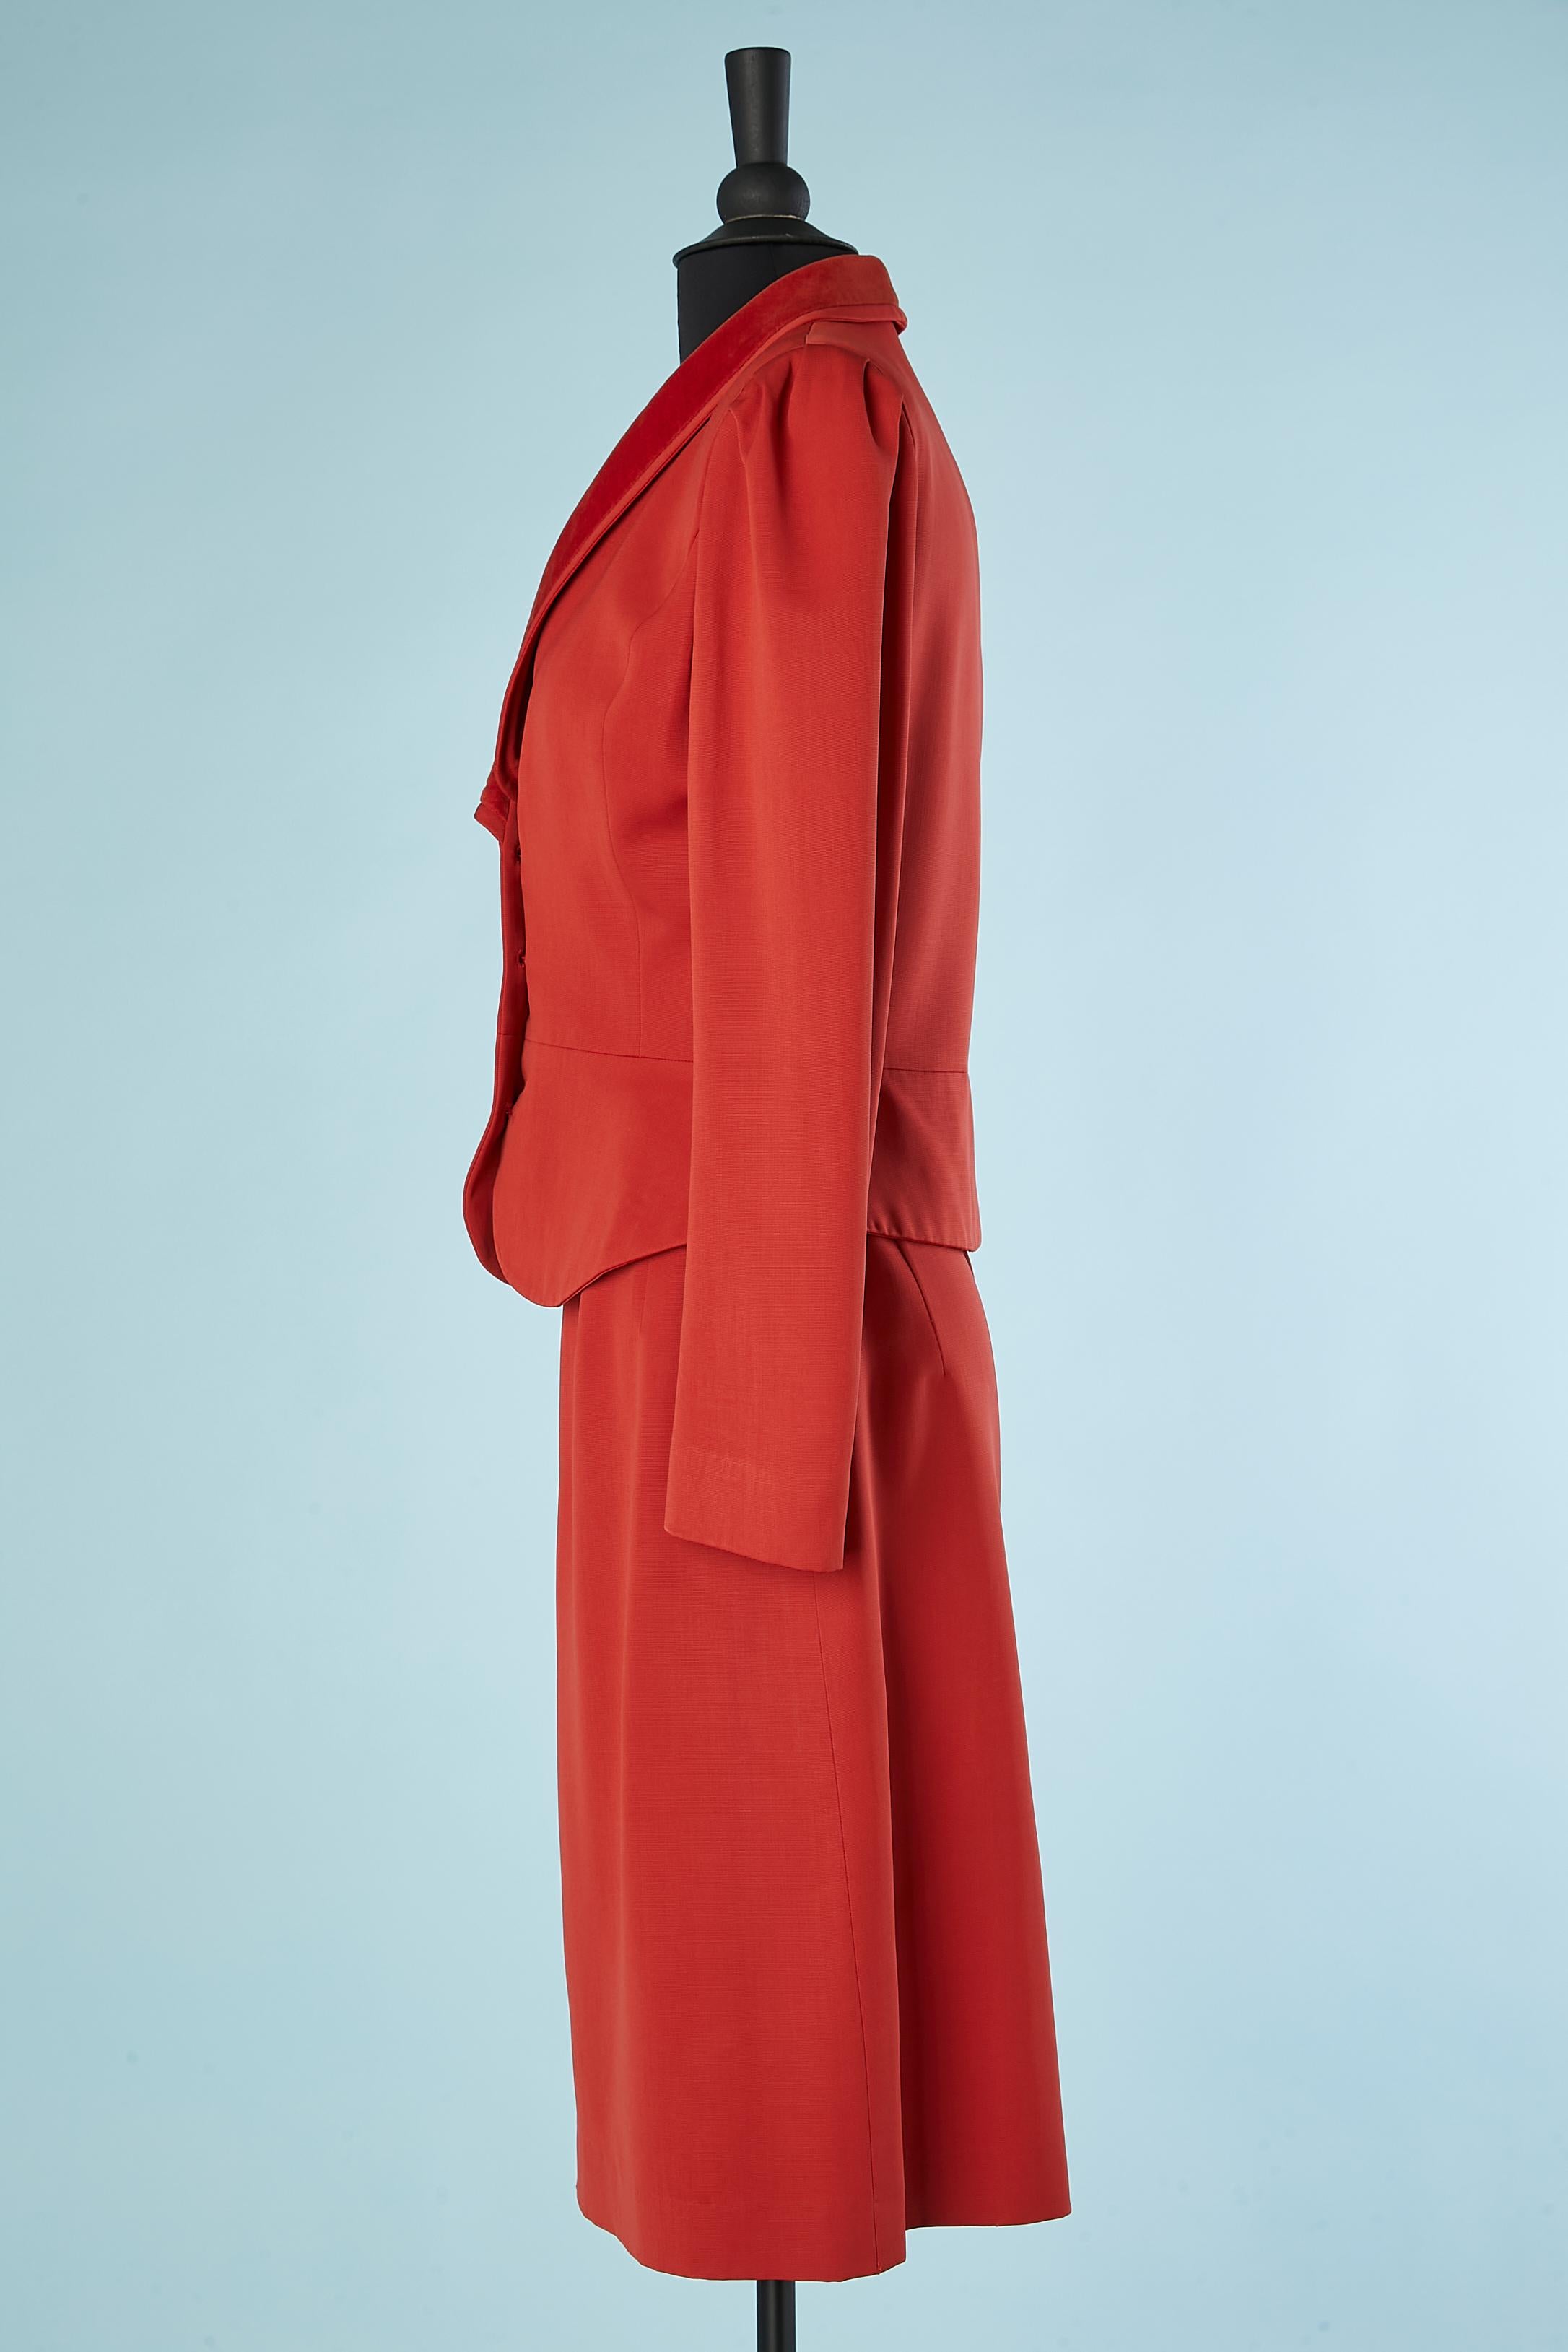 Women's Red wool skirt-suit with velvet collar Lanvin Circa 1960's  For Sale